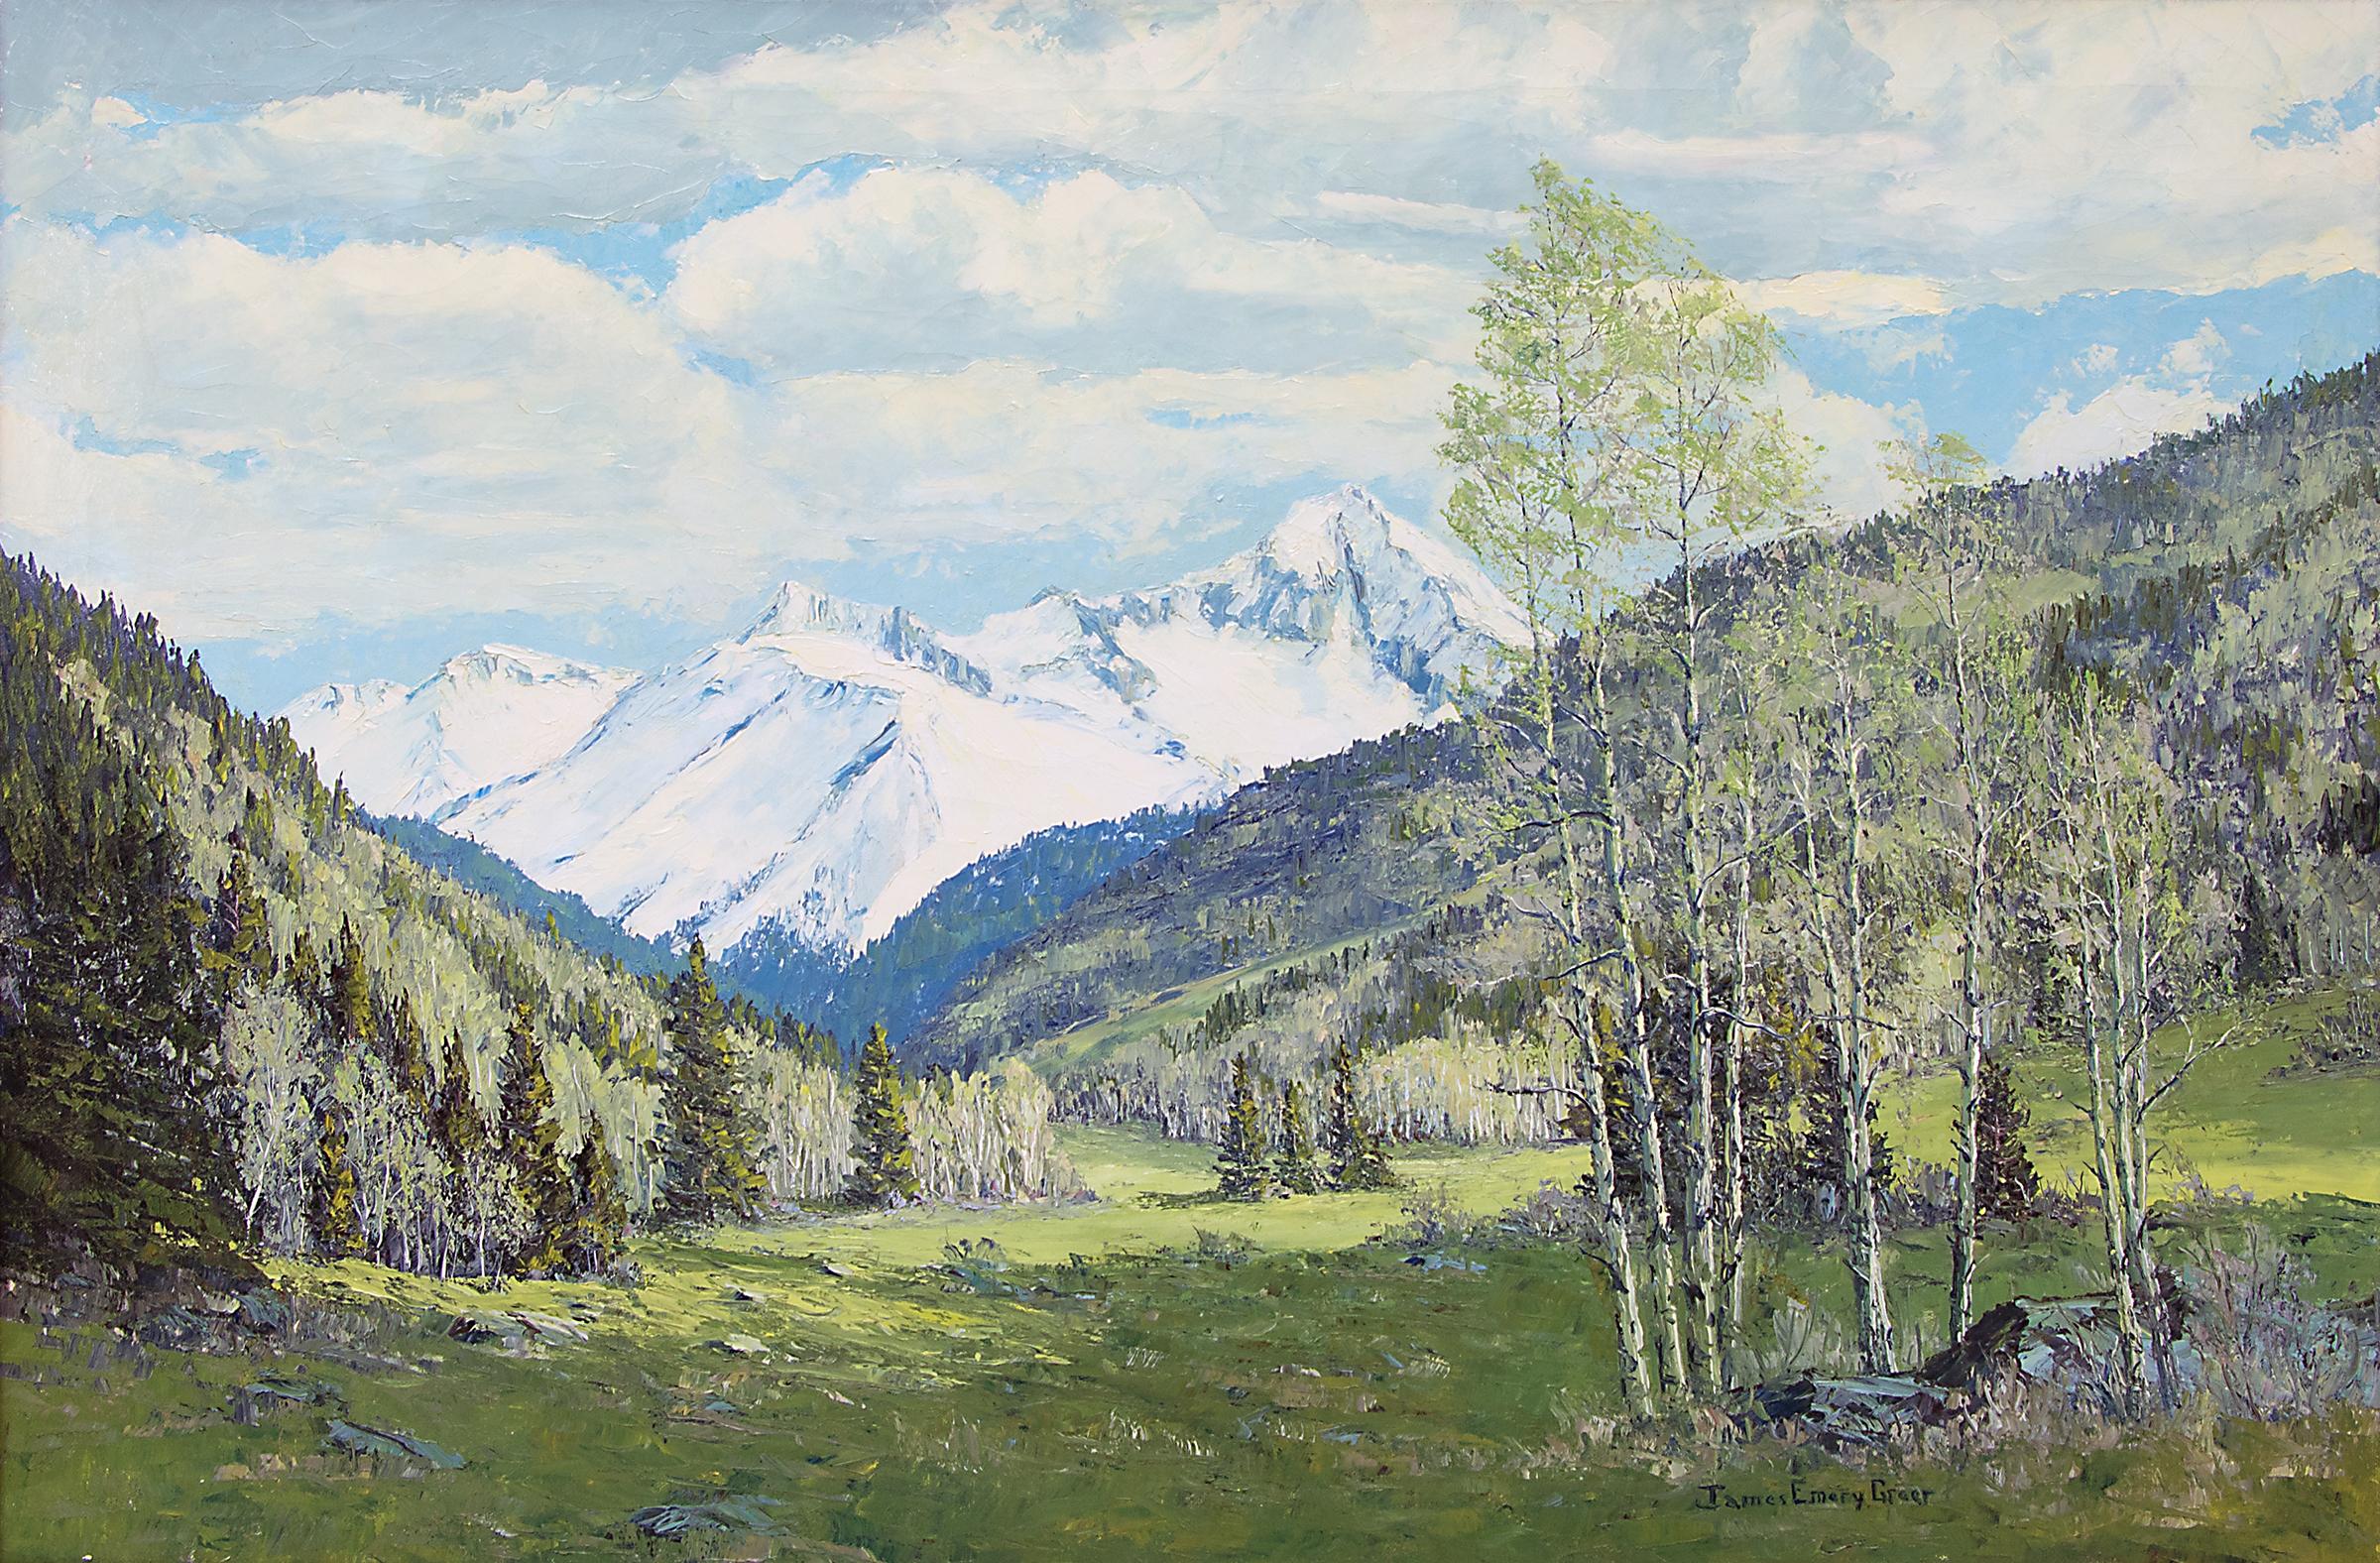 Renewal - Grizzly Peak San Juans (Colorado Mountain Landscape in Spring) - Painting by James Emery Greer